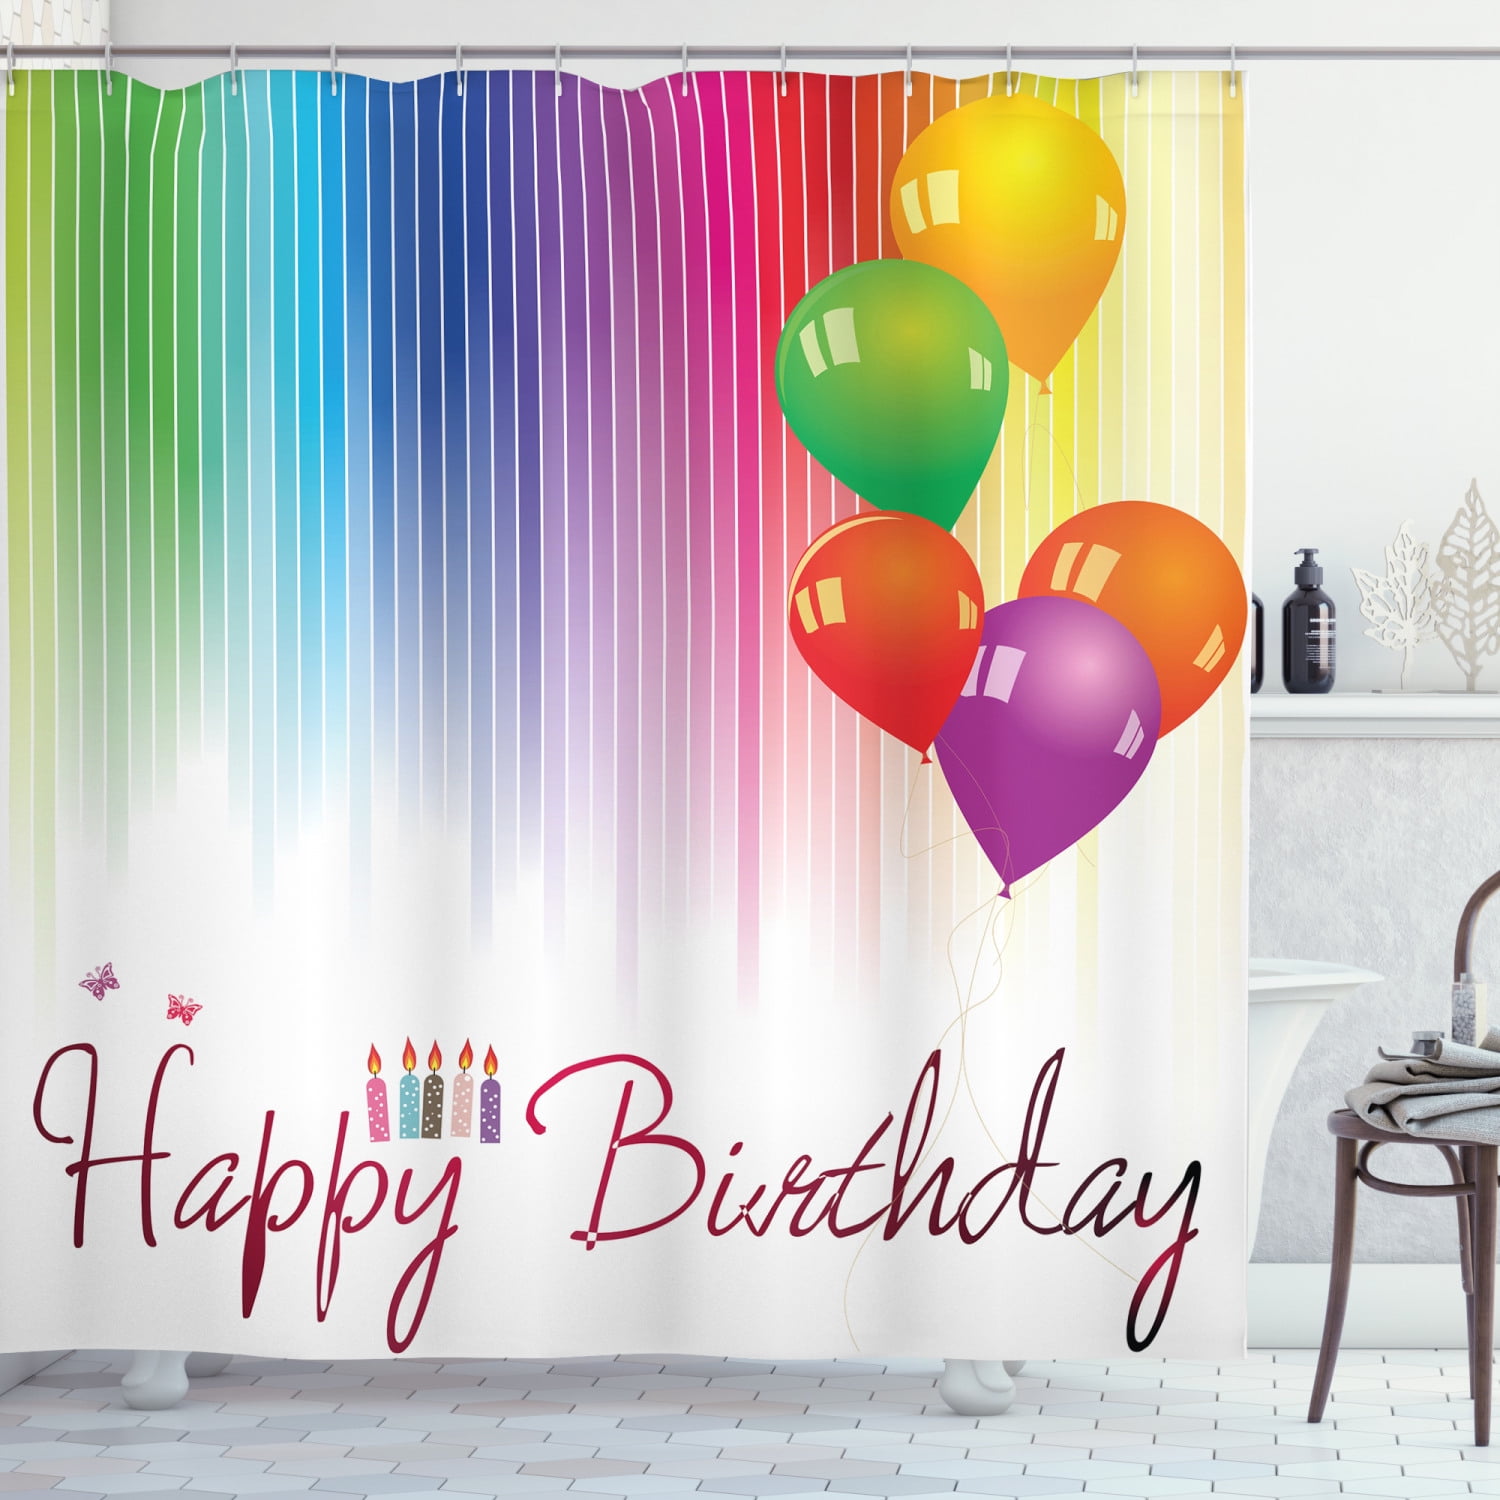 Birthday Decorations Shower Curtain, Rainbow Colored Striped Backdrop  Balloons Stylized Lettering Candles, Fabric Bathroom Set with Hooks, 69W X  84L Inches Extra Long, Multicolor, by Ambesonne 